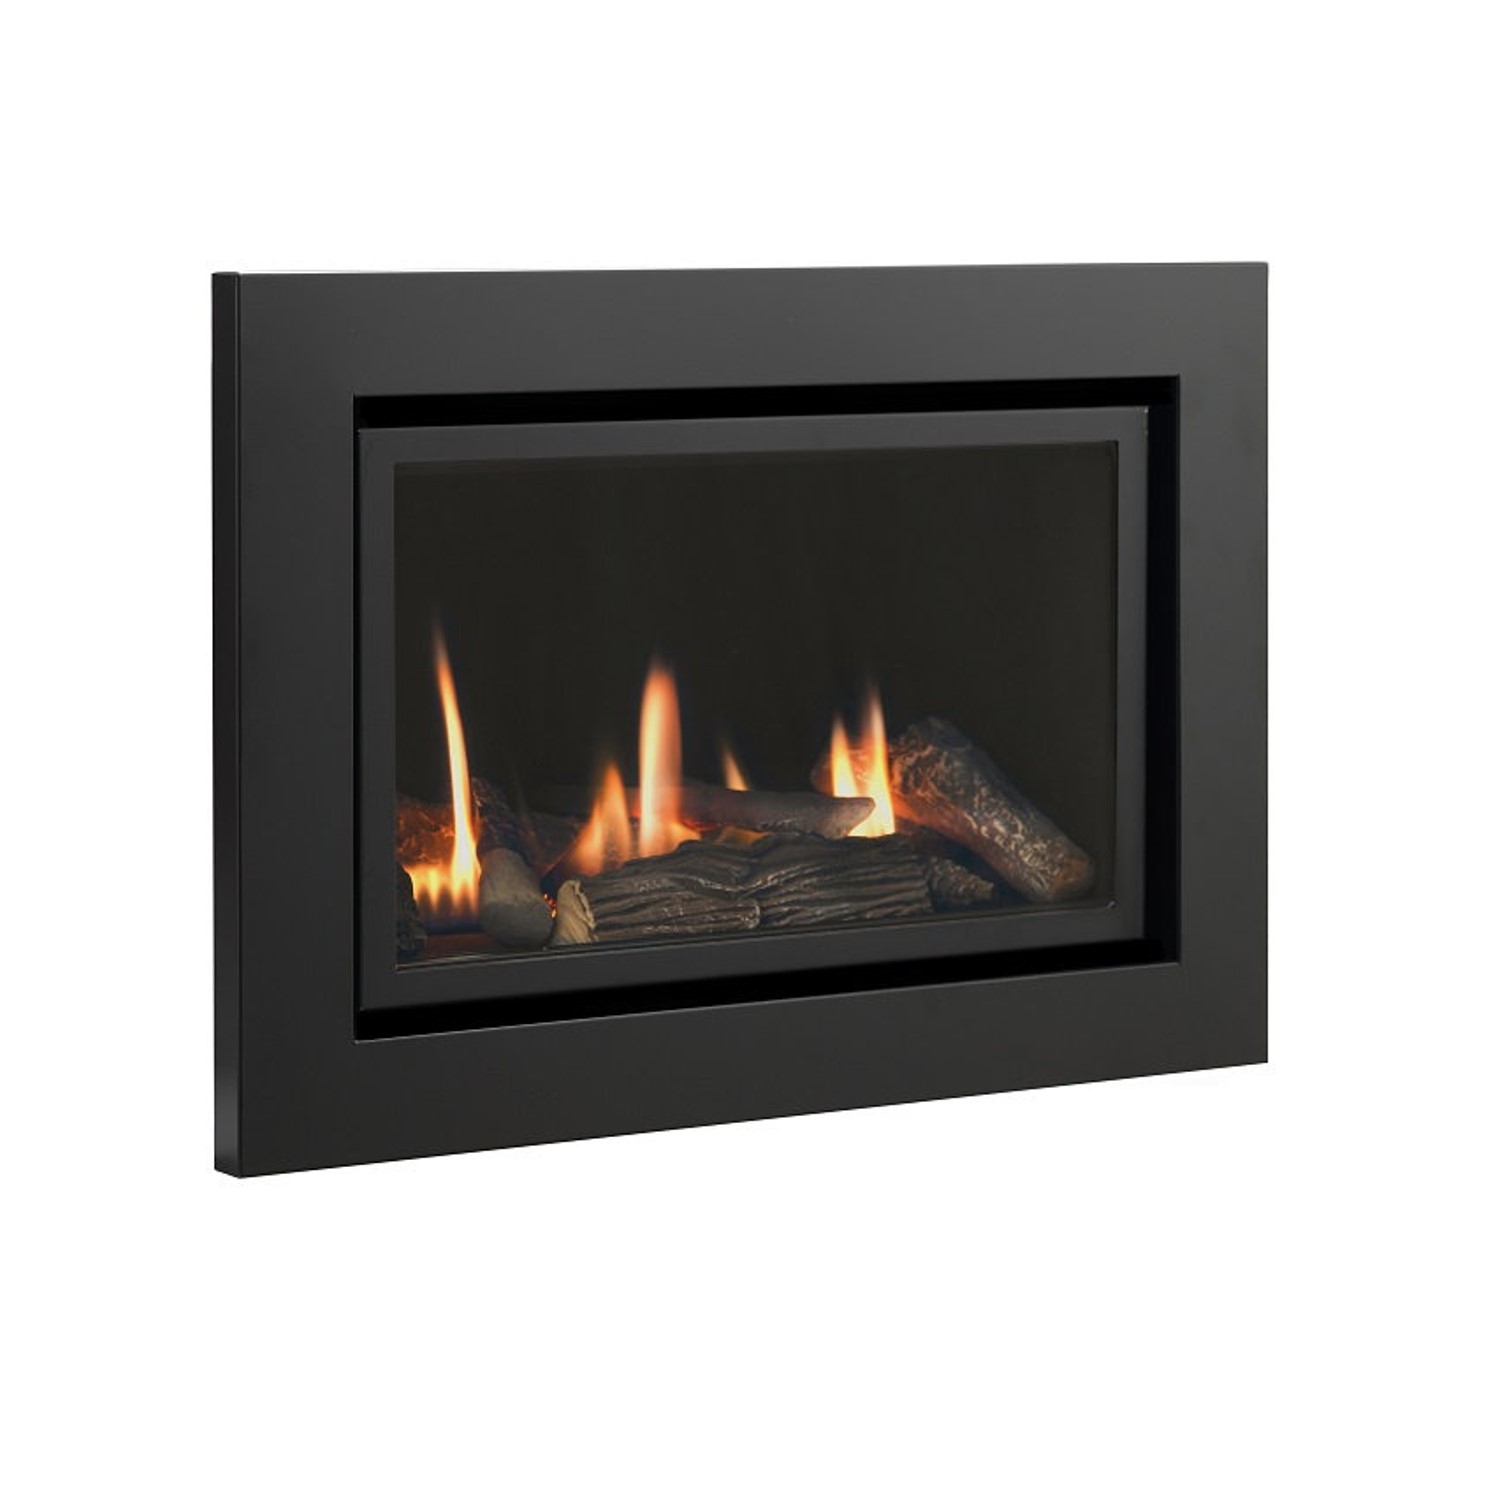 Read more about Frameless black inset gas fire with logs vola 600